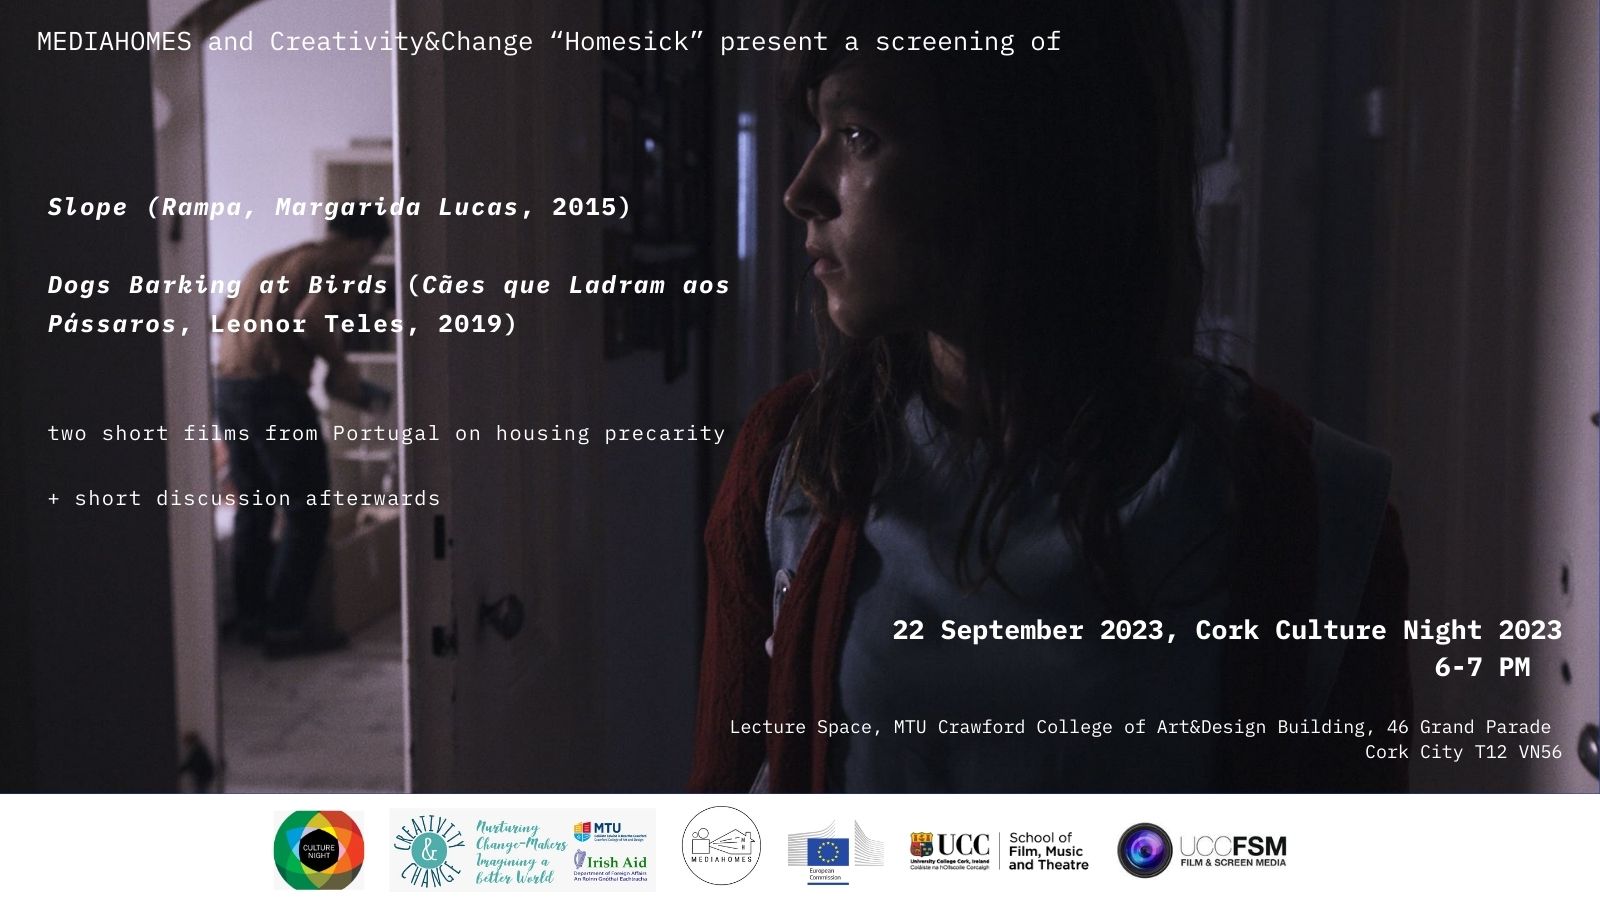 MEDIAHOMES screening as part of Culture Night, in collaboration with MTU Crawford Creativity and Change